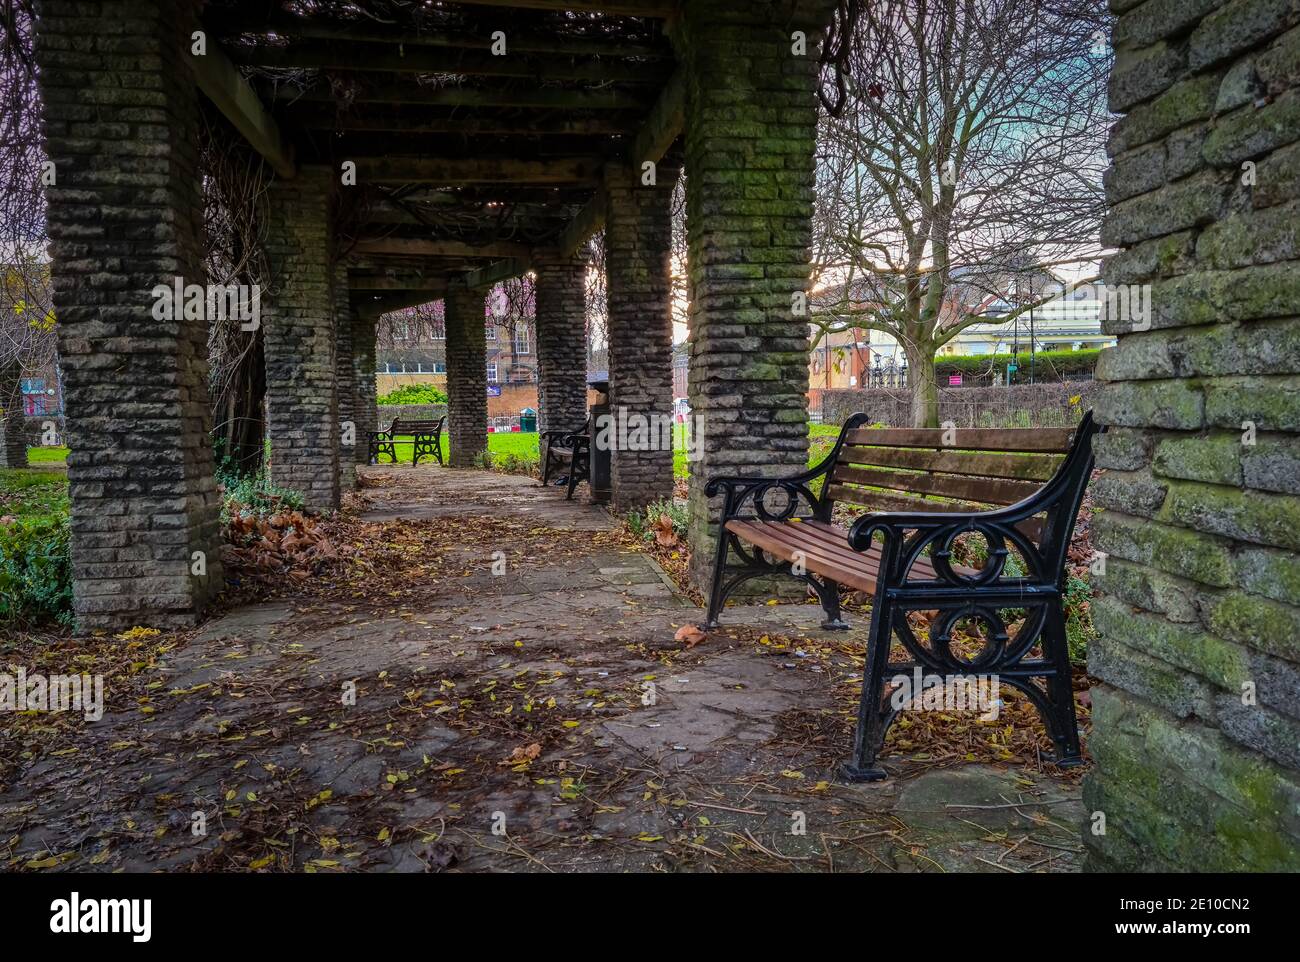 A covered walkway in a garden, park, with benches for resting. Stock Photo